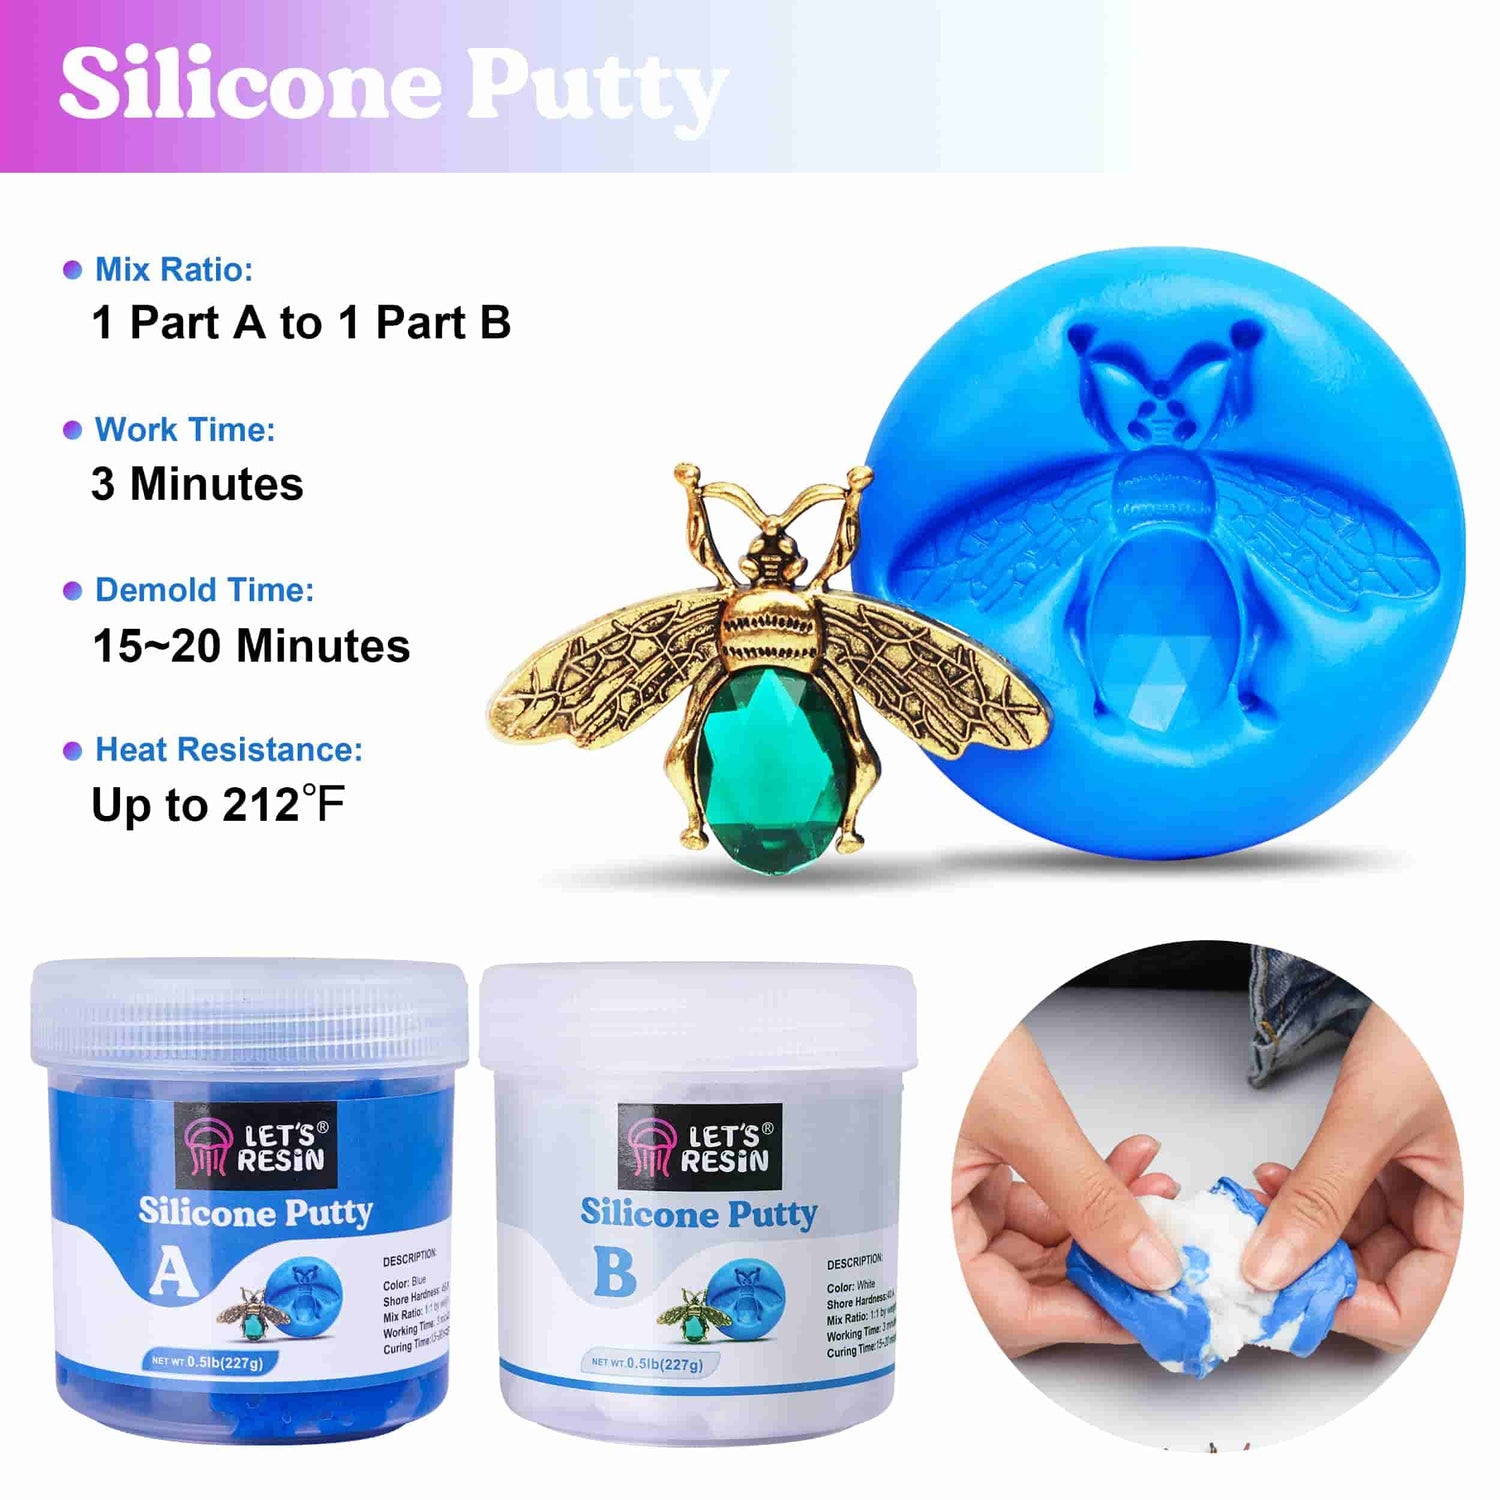 Mold Silicone Putty 2 Part Molding Compound | FStrong Reusable & Non-Toxic  | Heat-Resistant Molds For Casting Resin & Epoxy | Mold Making In Minutes